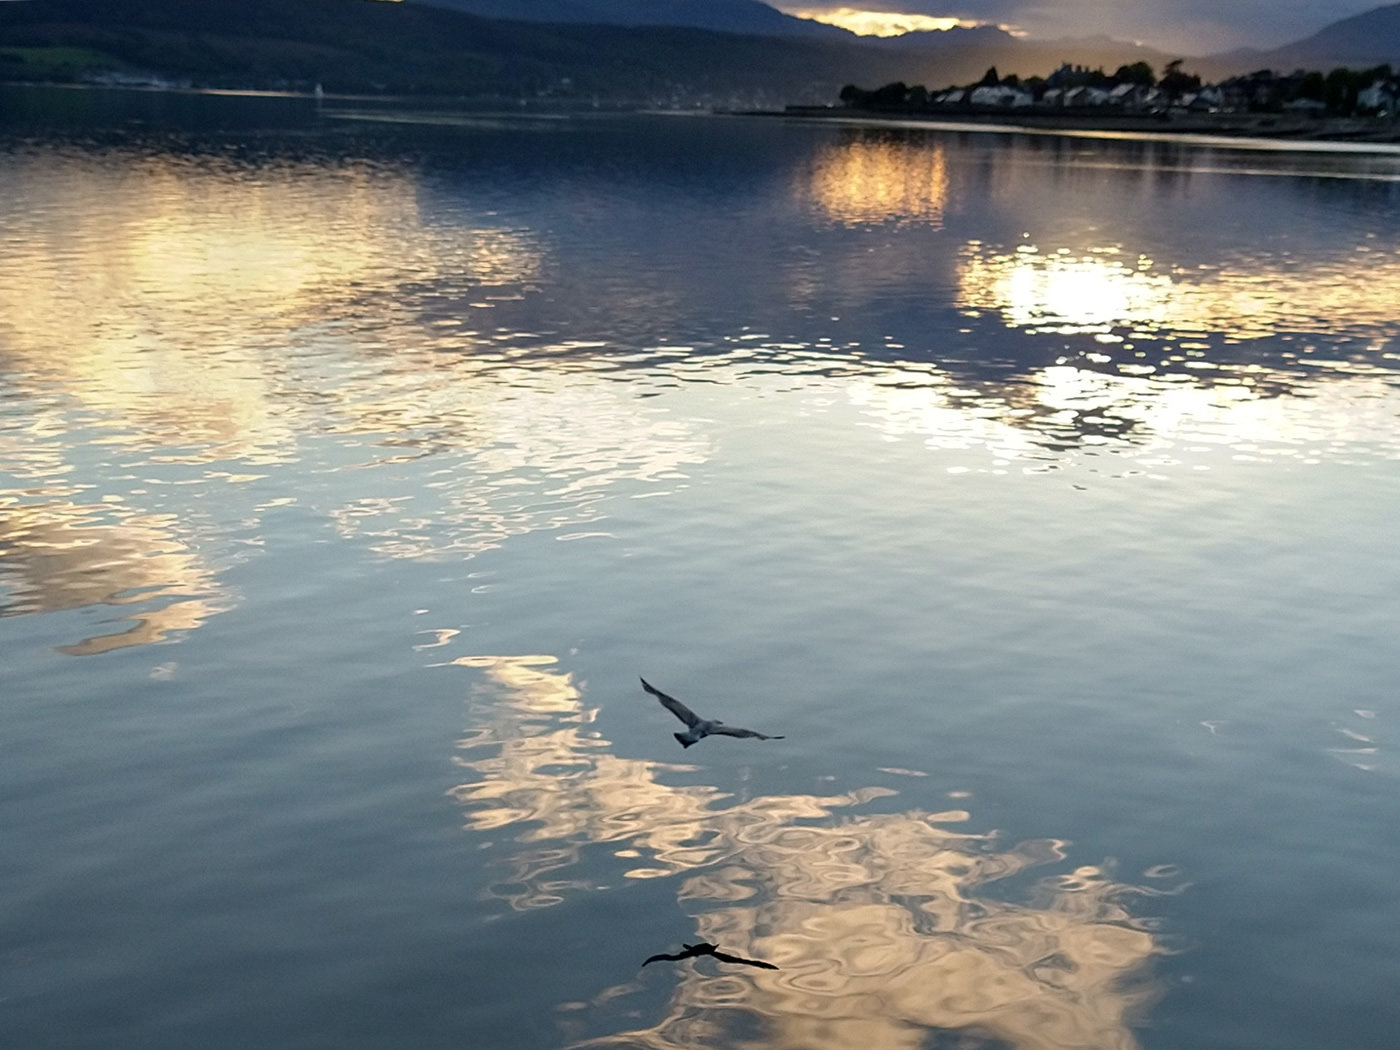 A seagull flying above the still water of the River Clyde, west of Helensburgh Pier at sunset